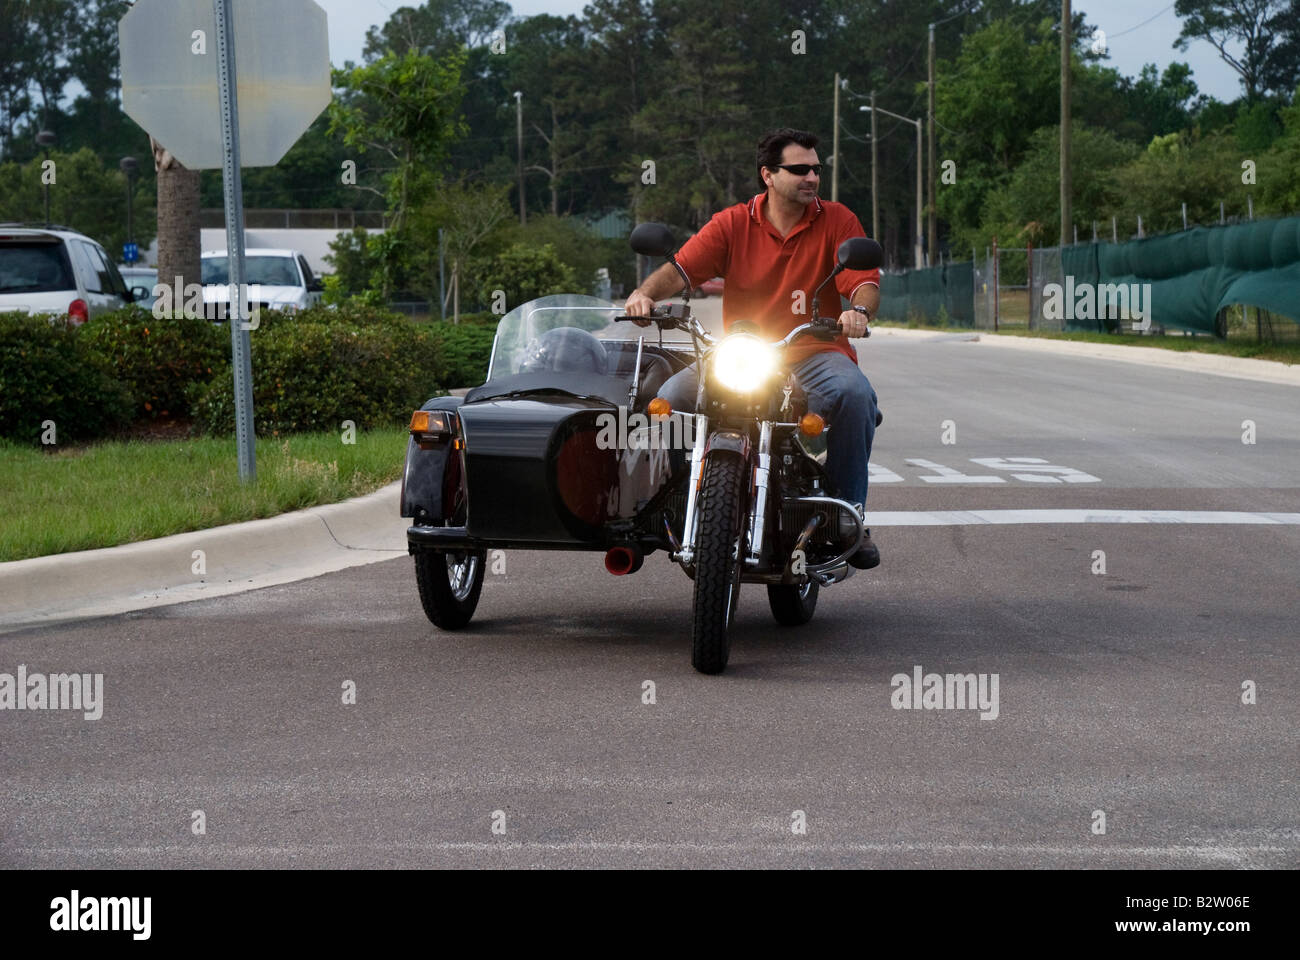 man riding a motorcycle with sidecar Gainesville Florida URAL YPAN motorcycle from Russia Stock Photo